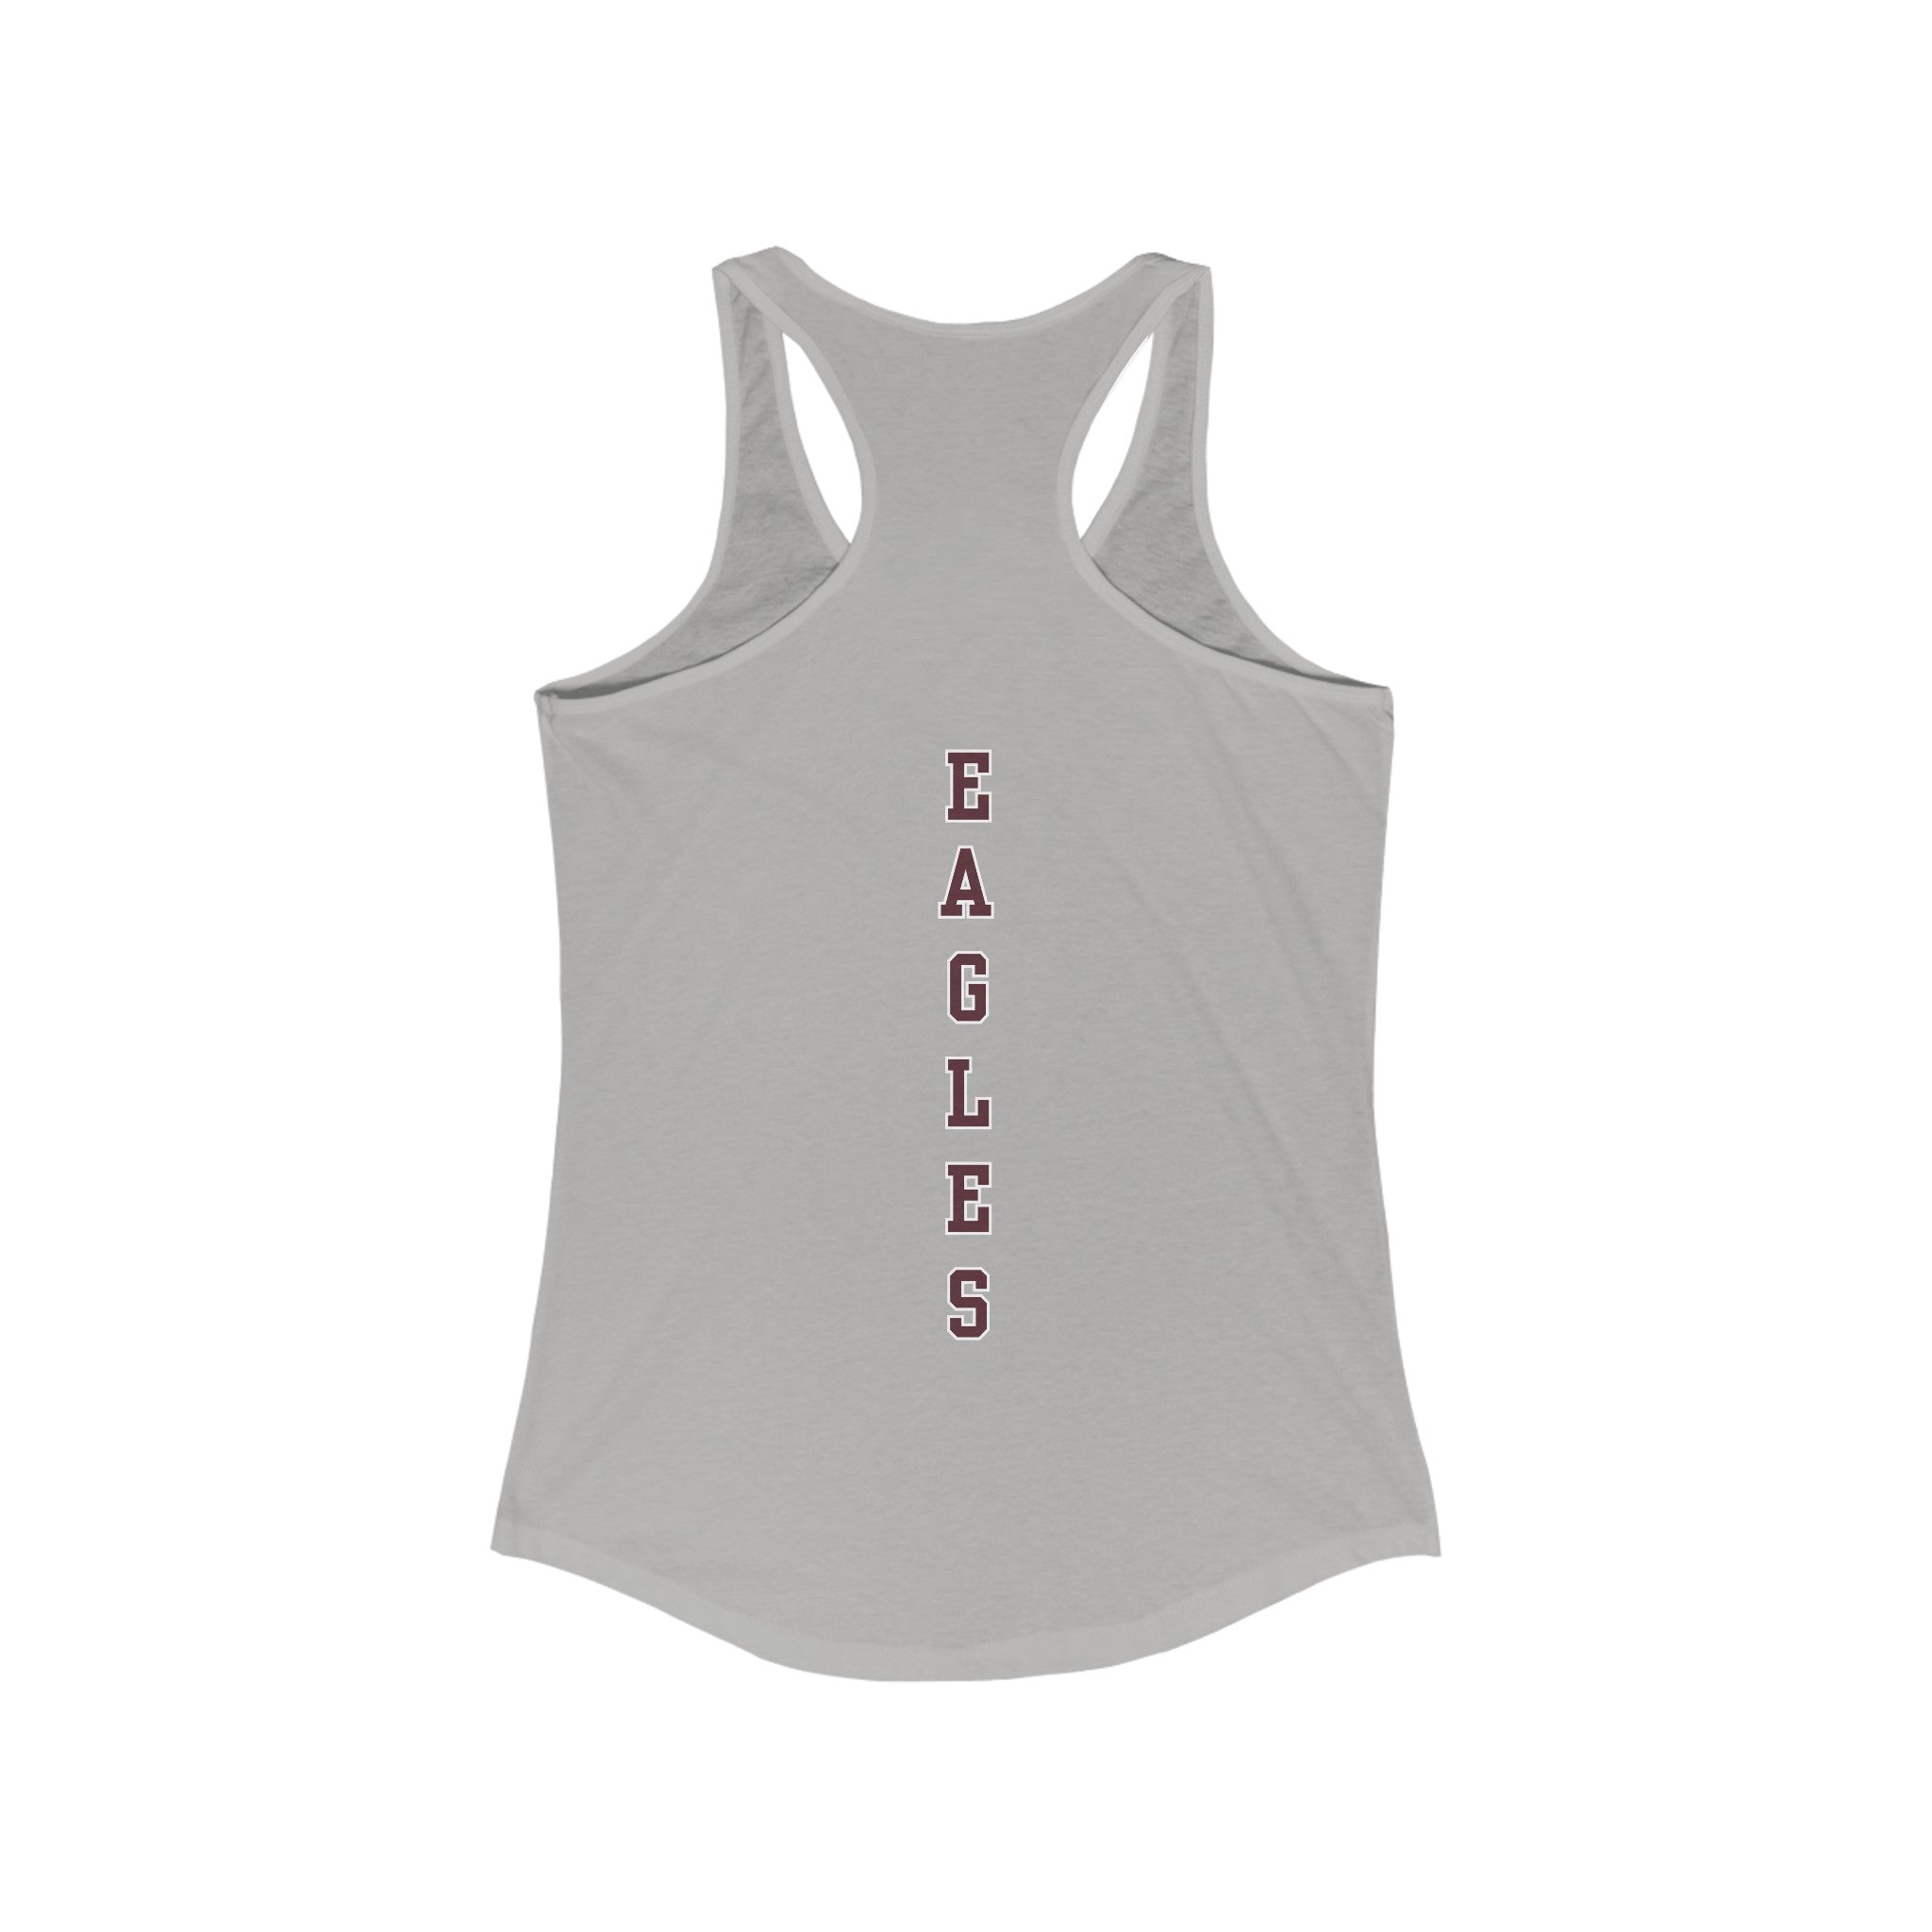 Women's Classic Logo with Back Detail Racerback Tank - New Albany Eagles